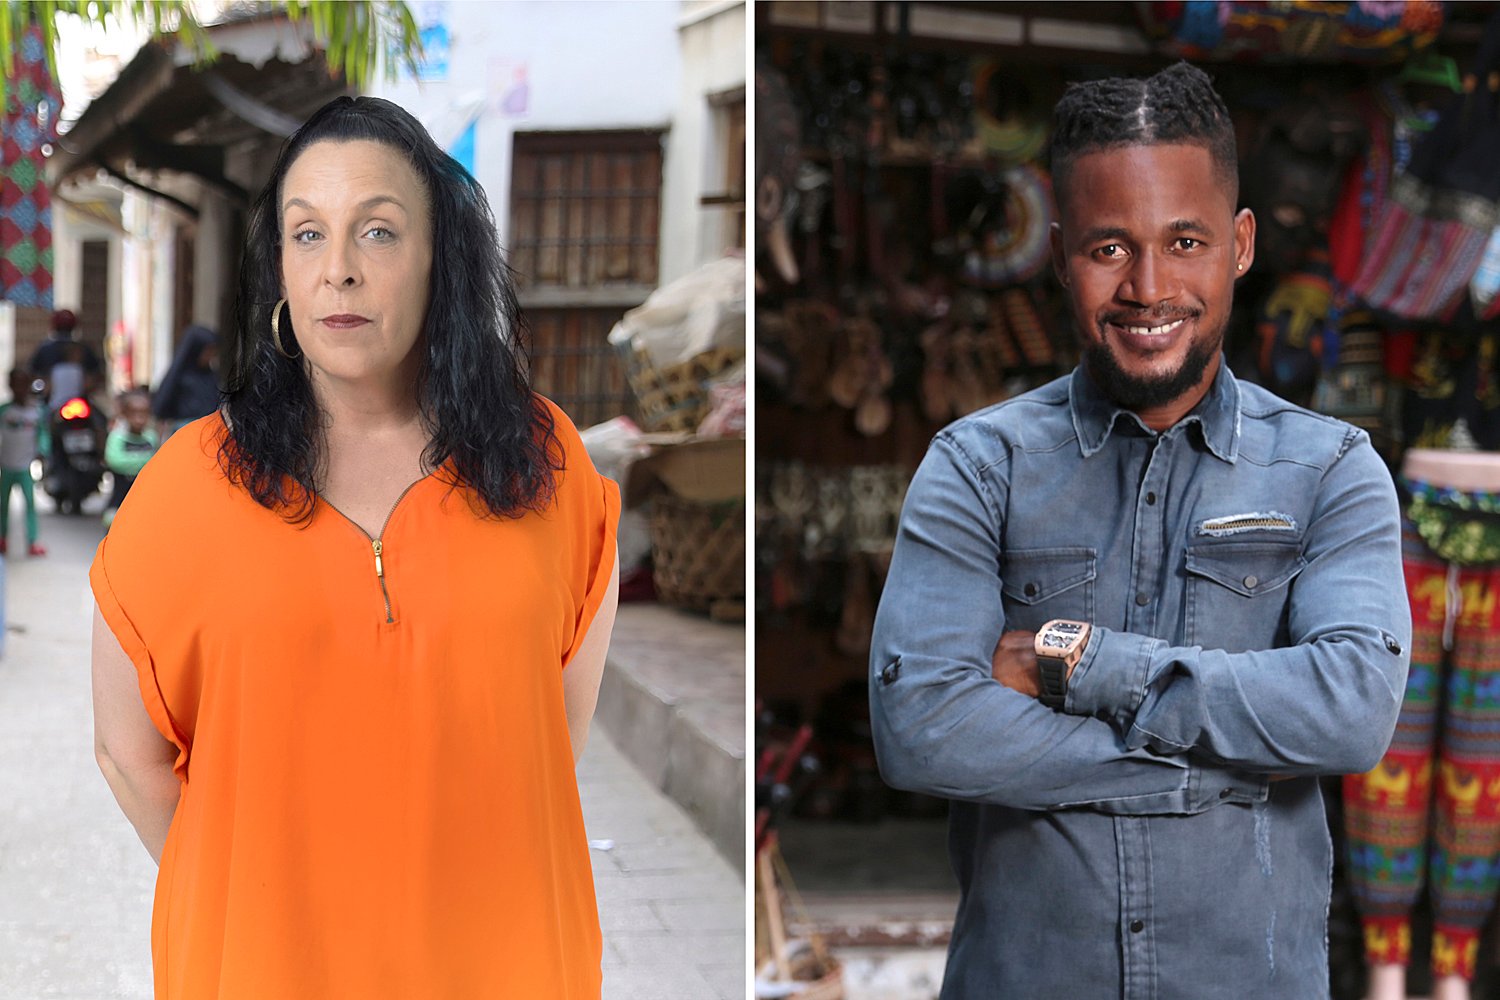 'Before the 90 Days' Season 5 stars Kimberly wearing a bright orange top and Usman wearing a denim button down